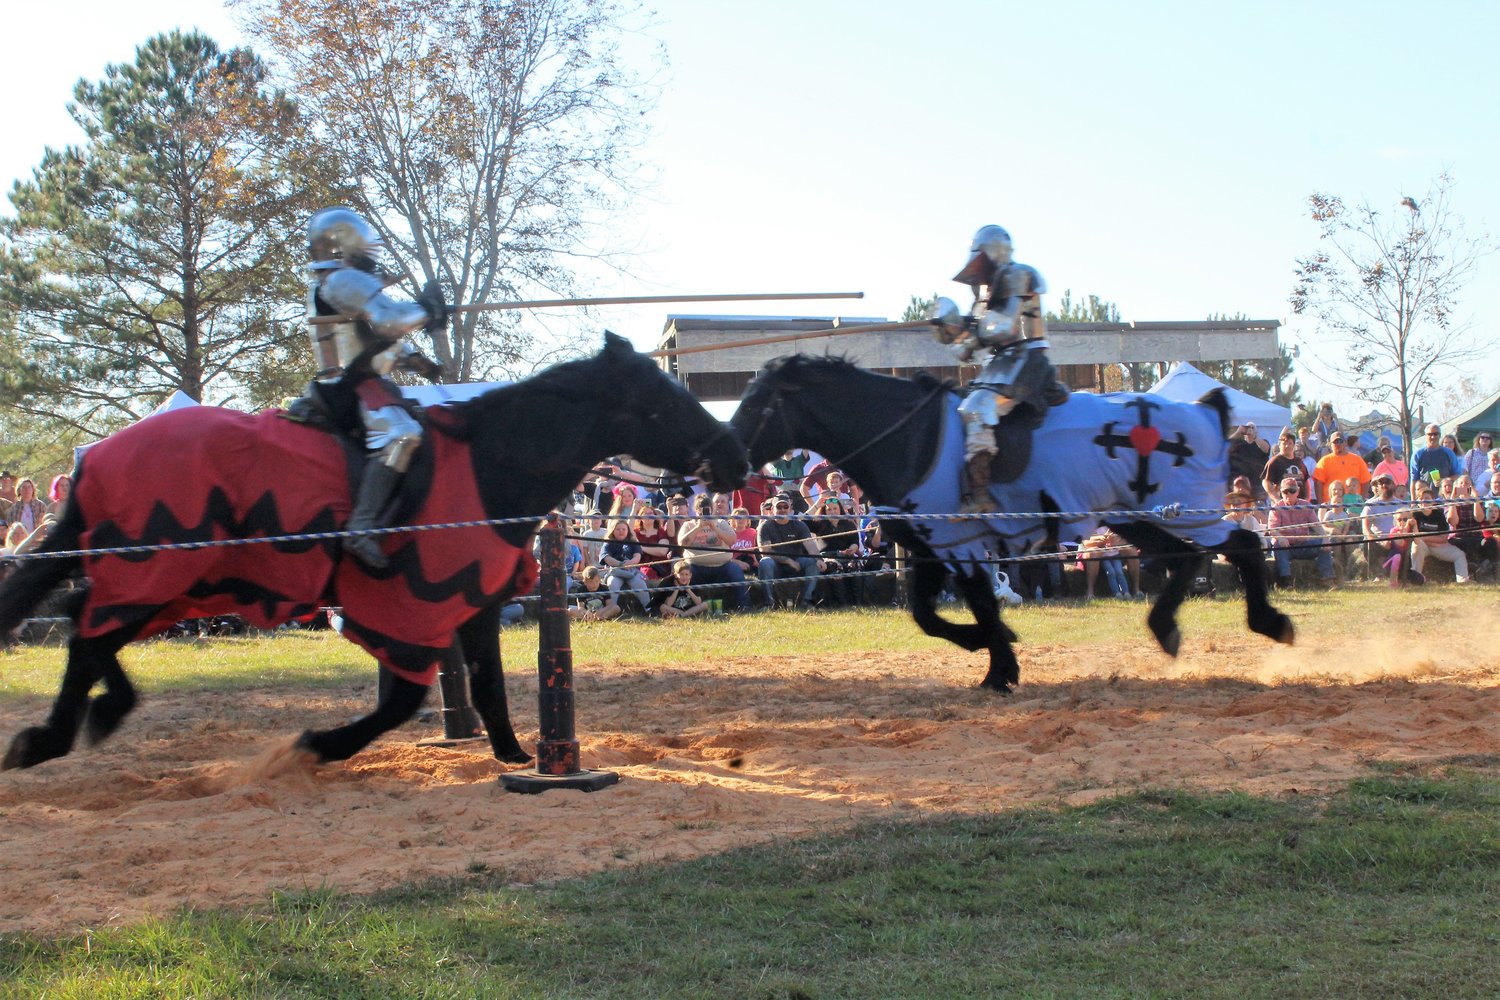 Competitors with the Knights of Valor full contact jousting make a pass during festivities on Saturday, Nov. 20 at the Jubilee Renaissance Faire at Medieval Village in Robertsdale.